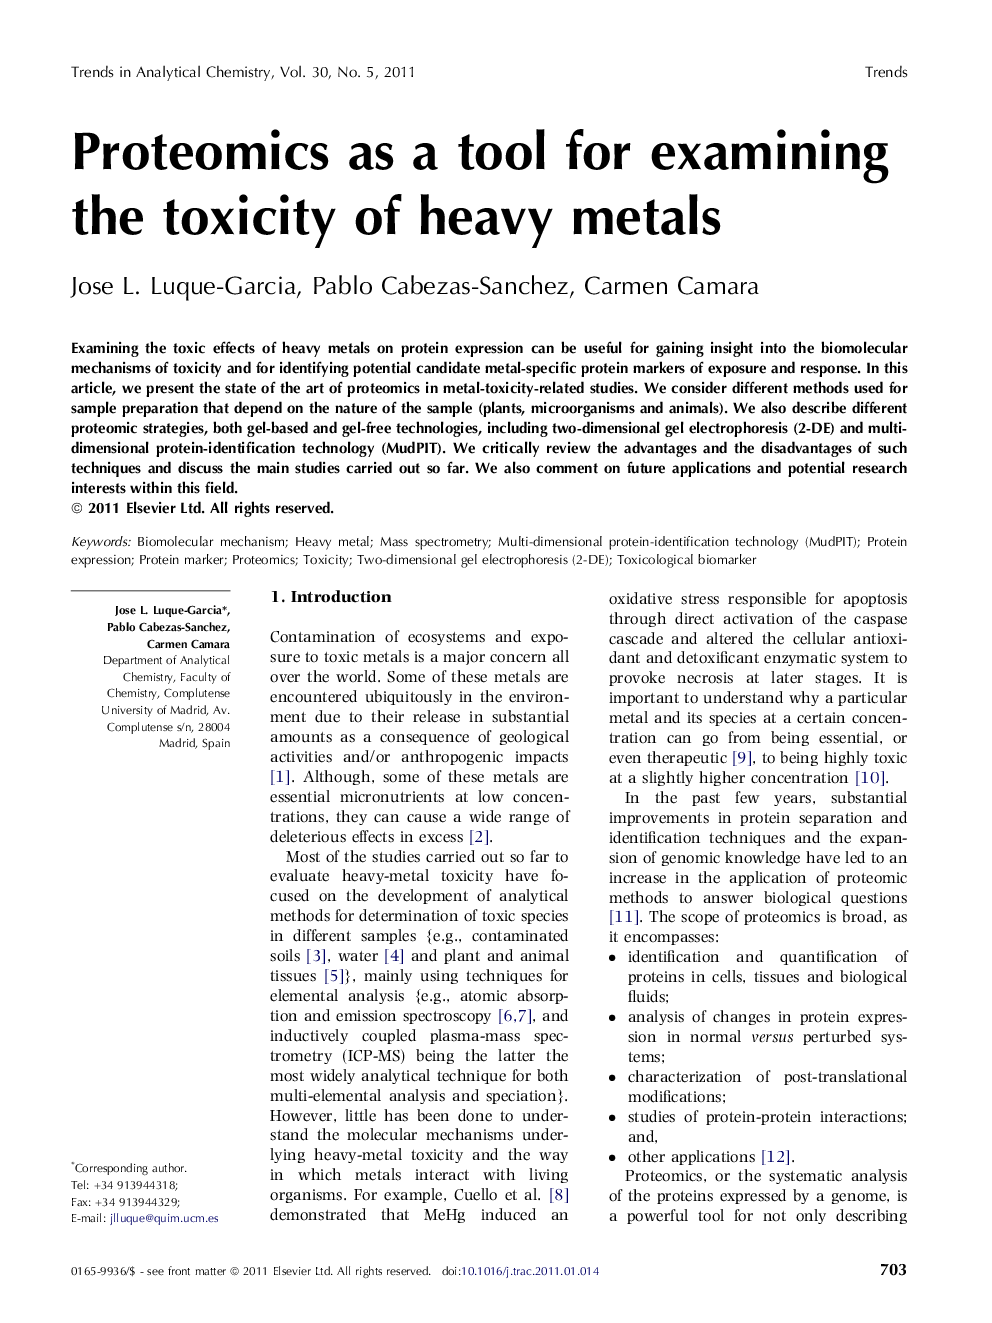 Proteomics as a tool for examining the toxicity of heavy metals